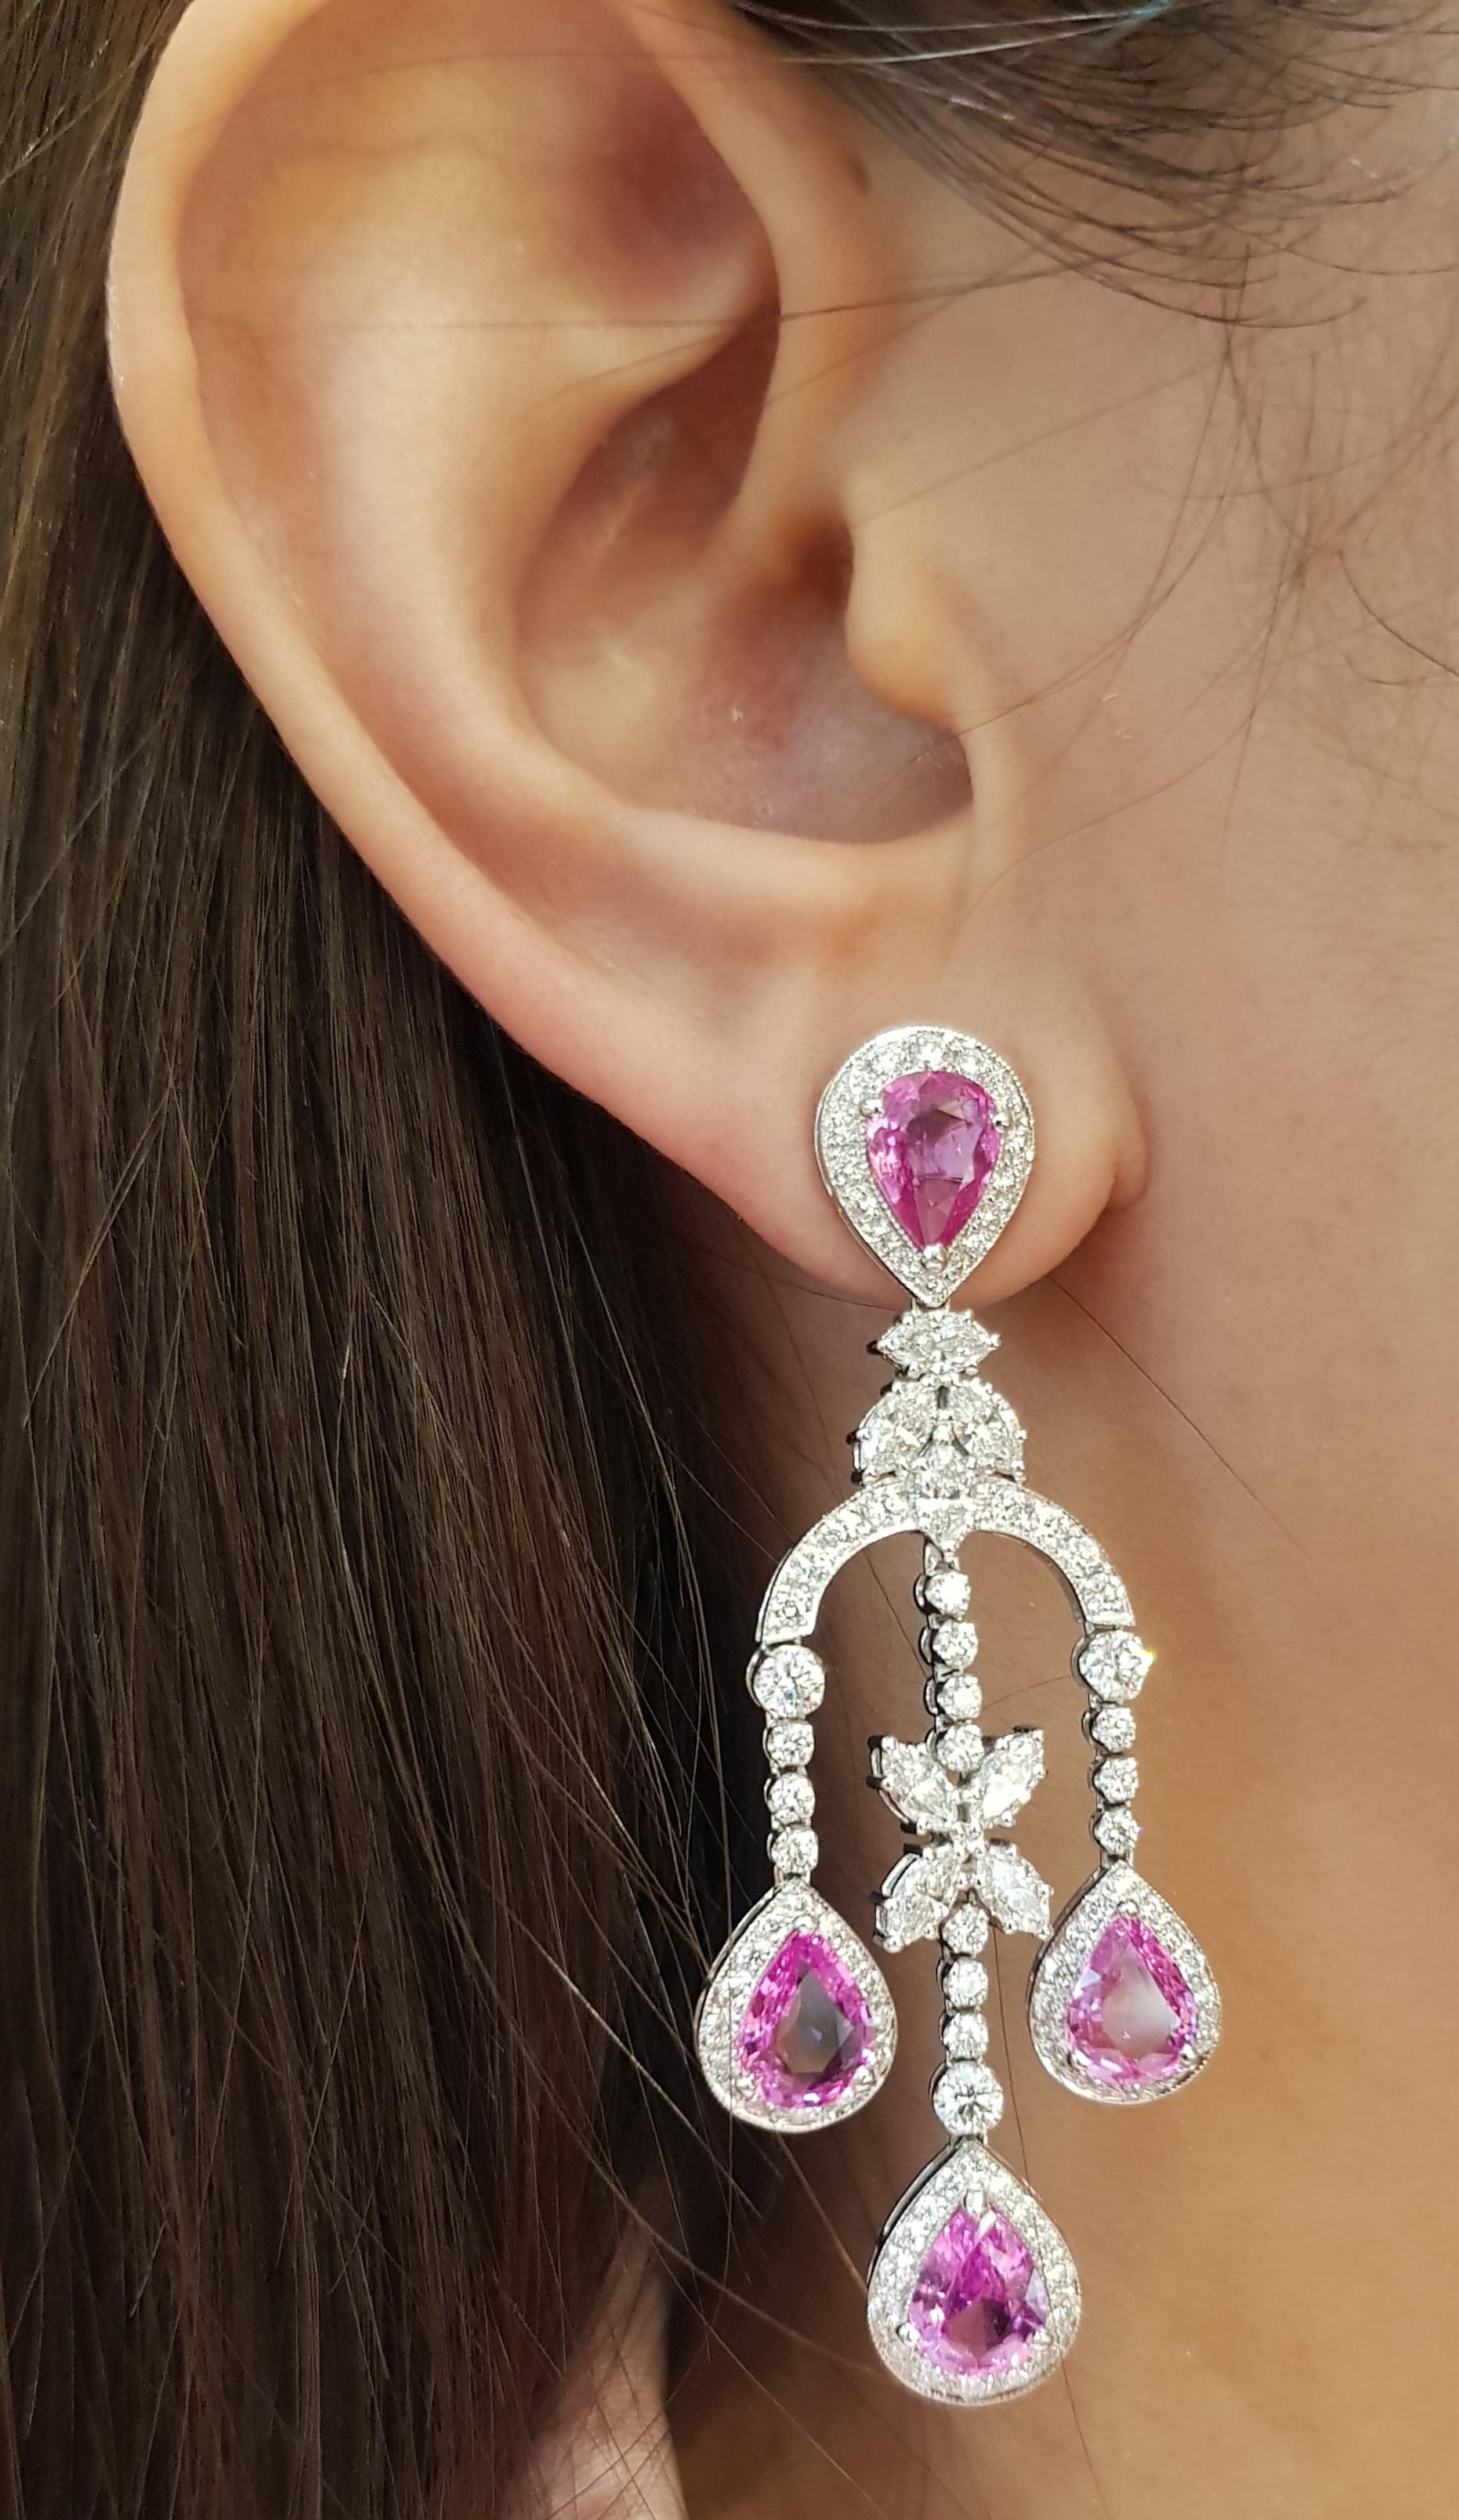 Pink Sapphire 8.19 carats with Diamond 4.95 carats Earrings set in 18 Karat White Gold Settings

Width:  2.5 cm 
Length:  5.9 cm
Total Weight: 20.44 grams

